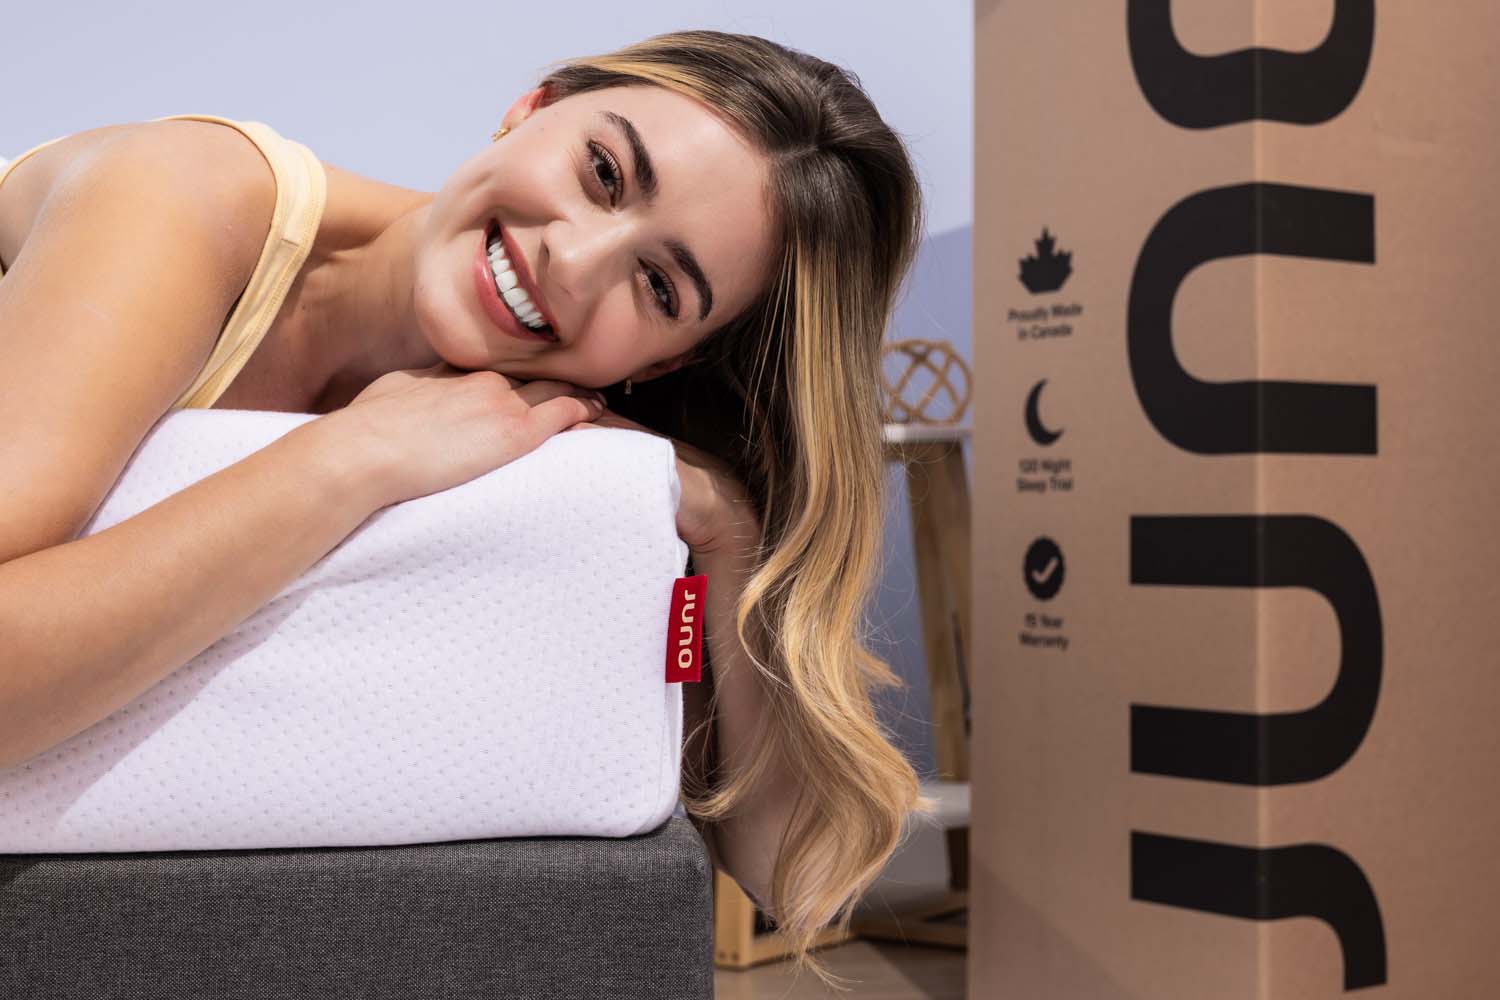 Woman smiling on Juno mattress with shipping box beside her